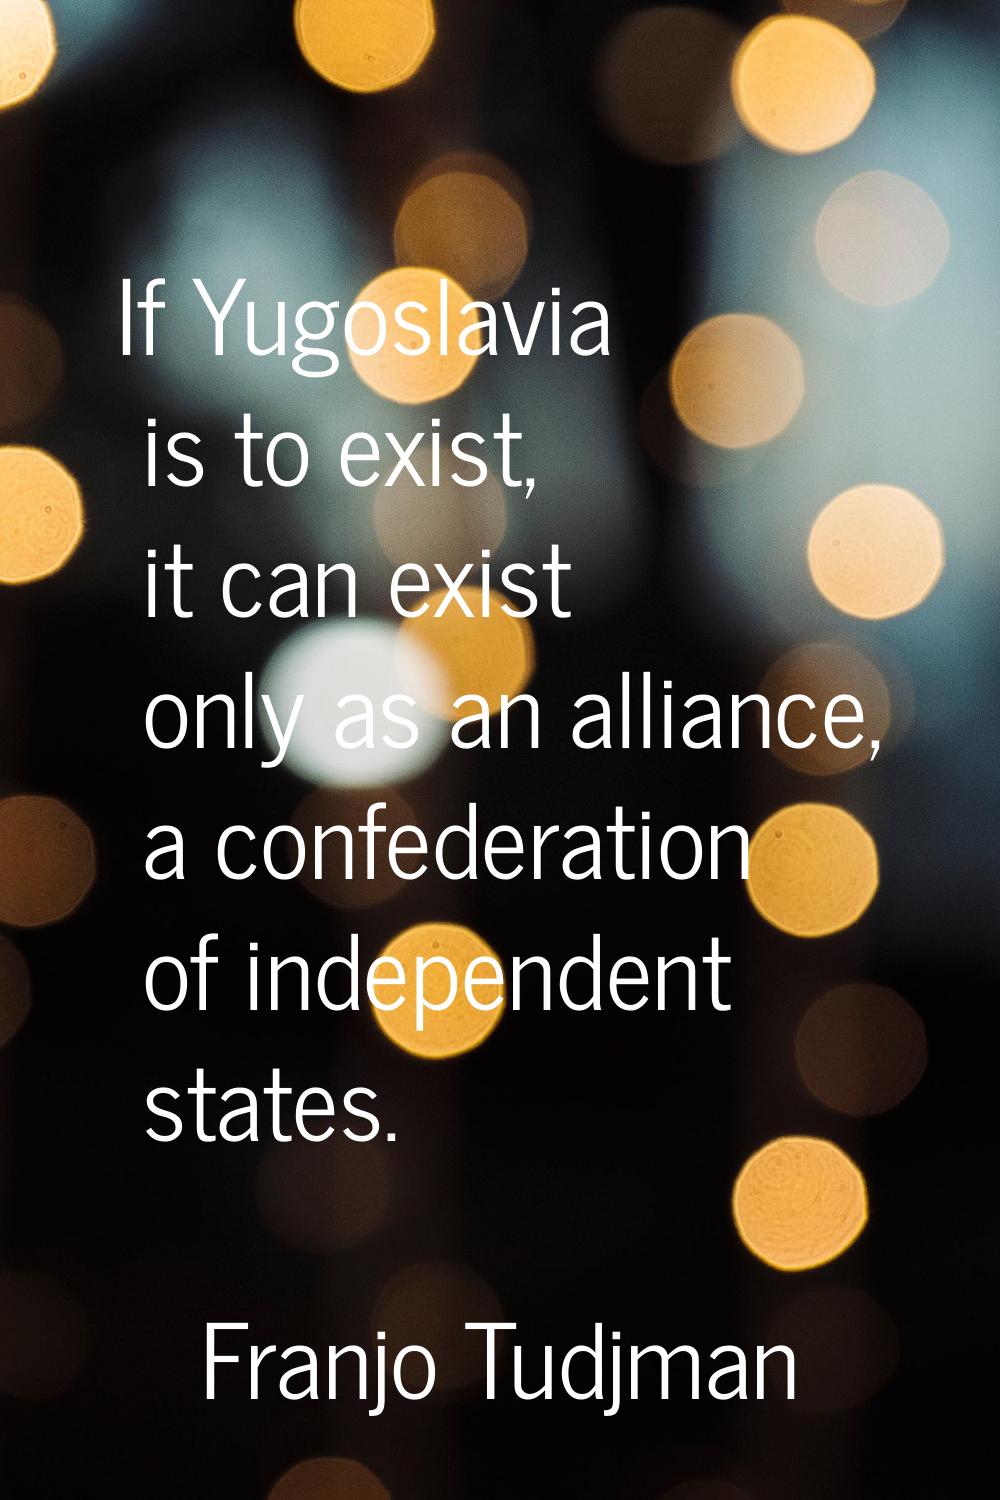 If Yugoslavia is to exist, it can exist only as an alliance, a confederation of independent states.